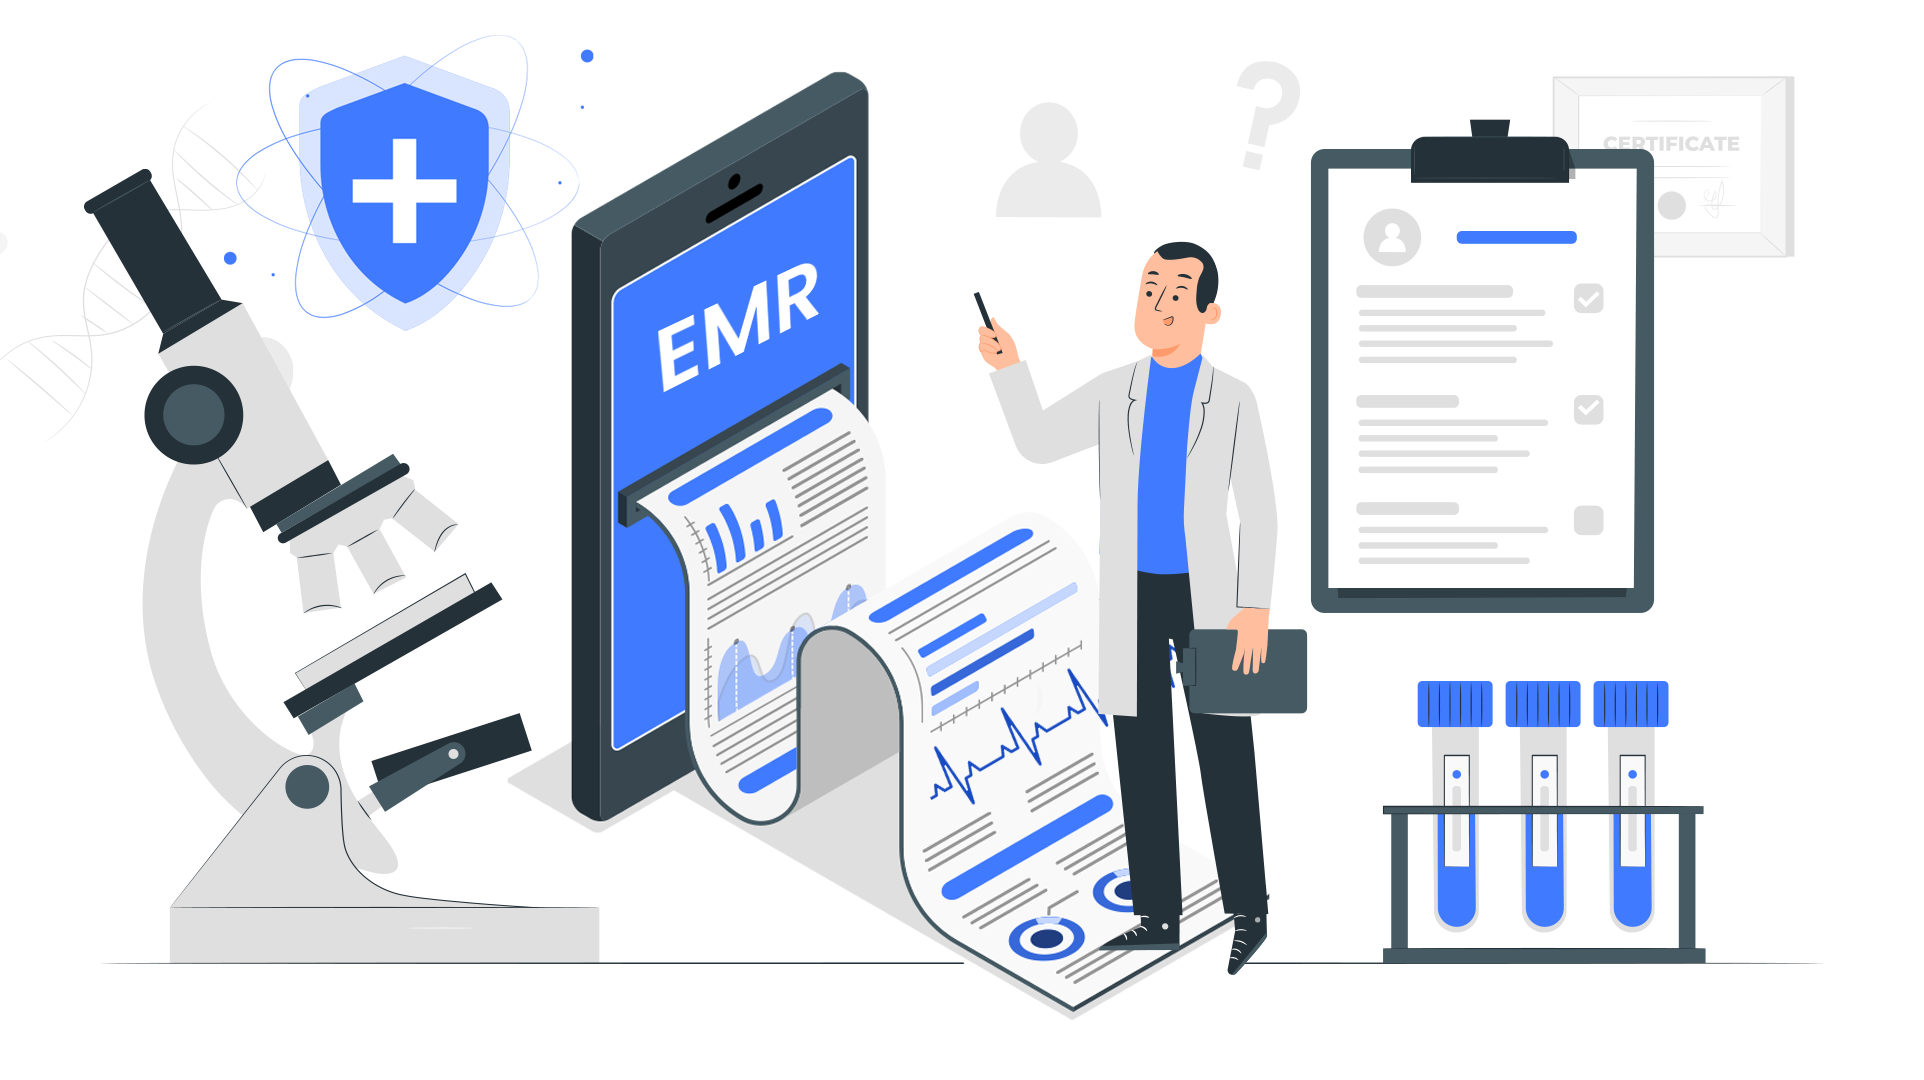 EMR Systems: The Evolution and Impact of Electronic Medical Record (EMR) Systems, Data Analytics and Population Health Management